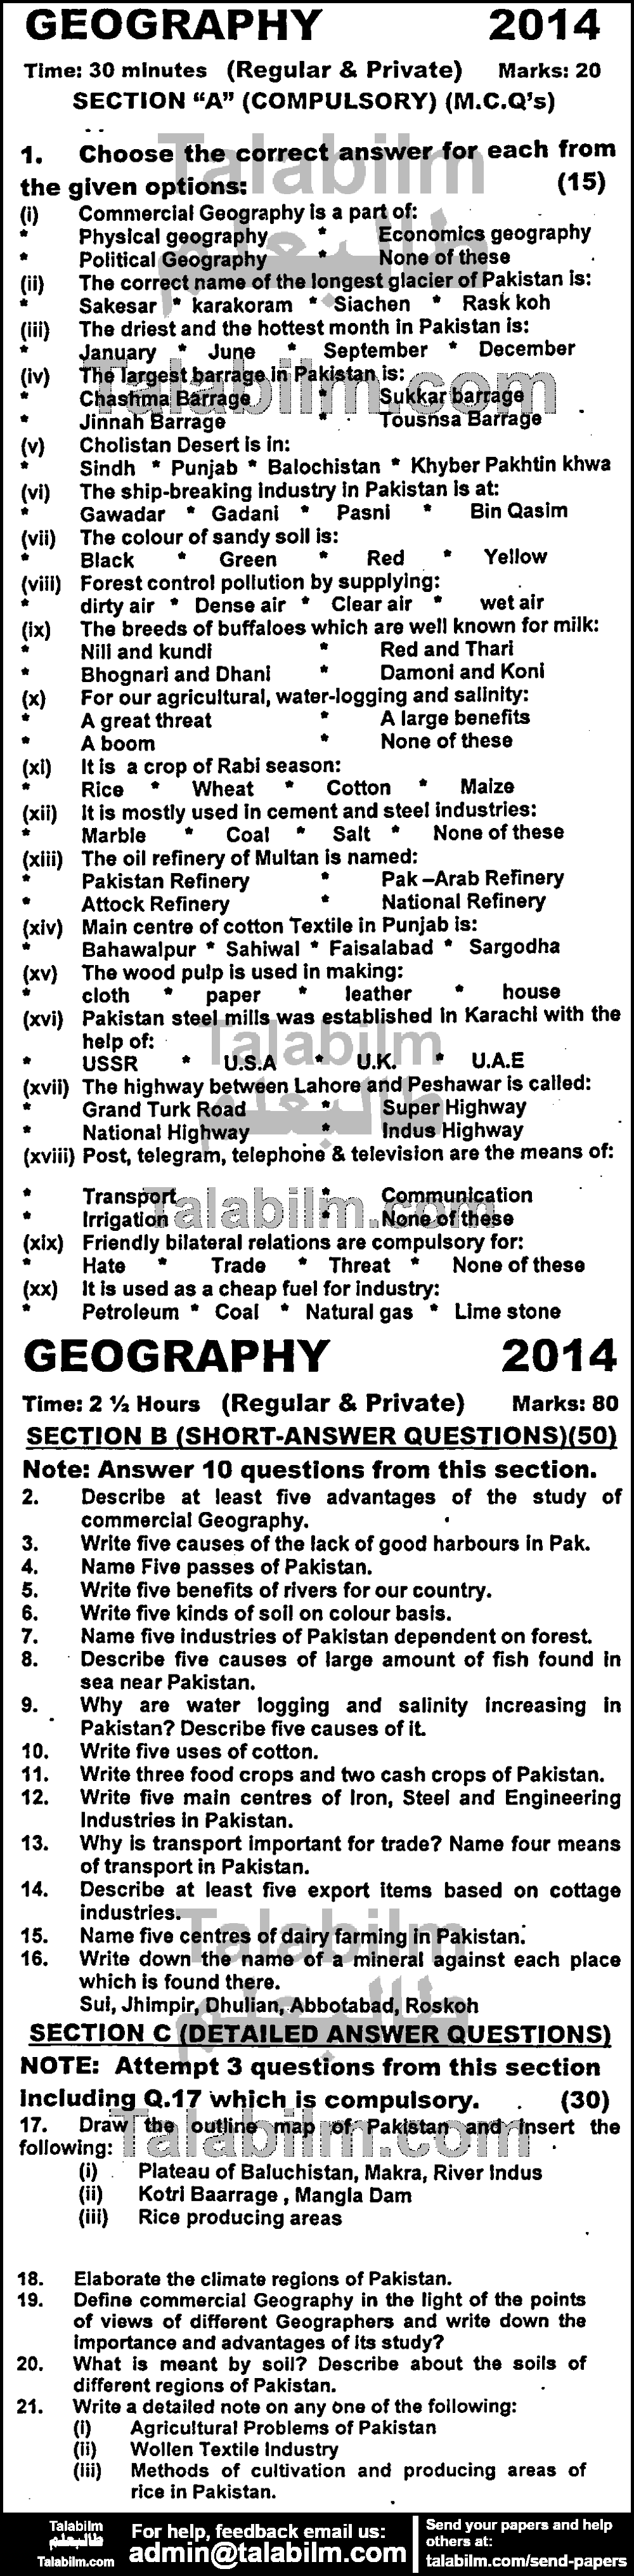 Commercial Geography 0 past paper for English Medium 2014 Group-I